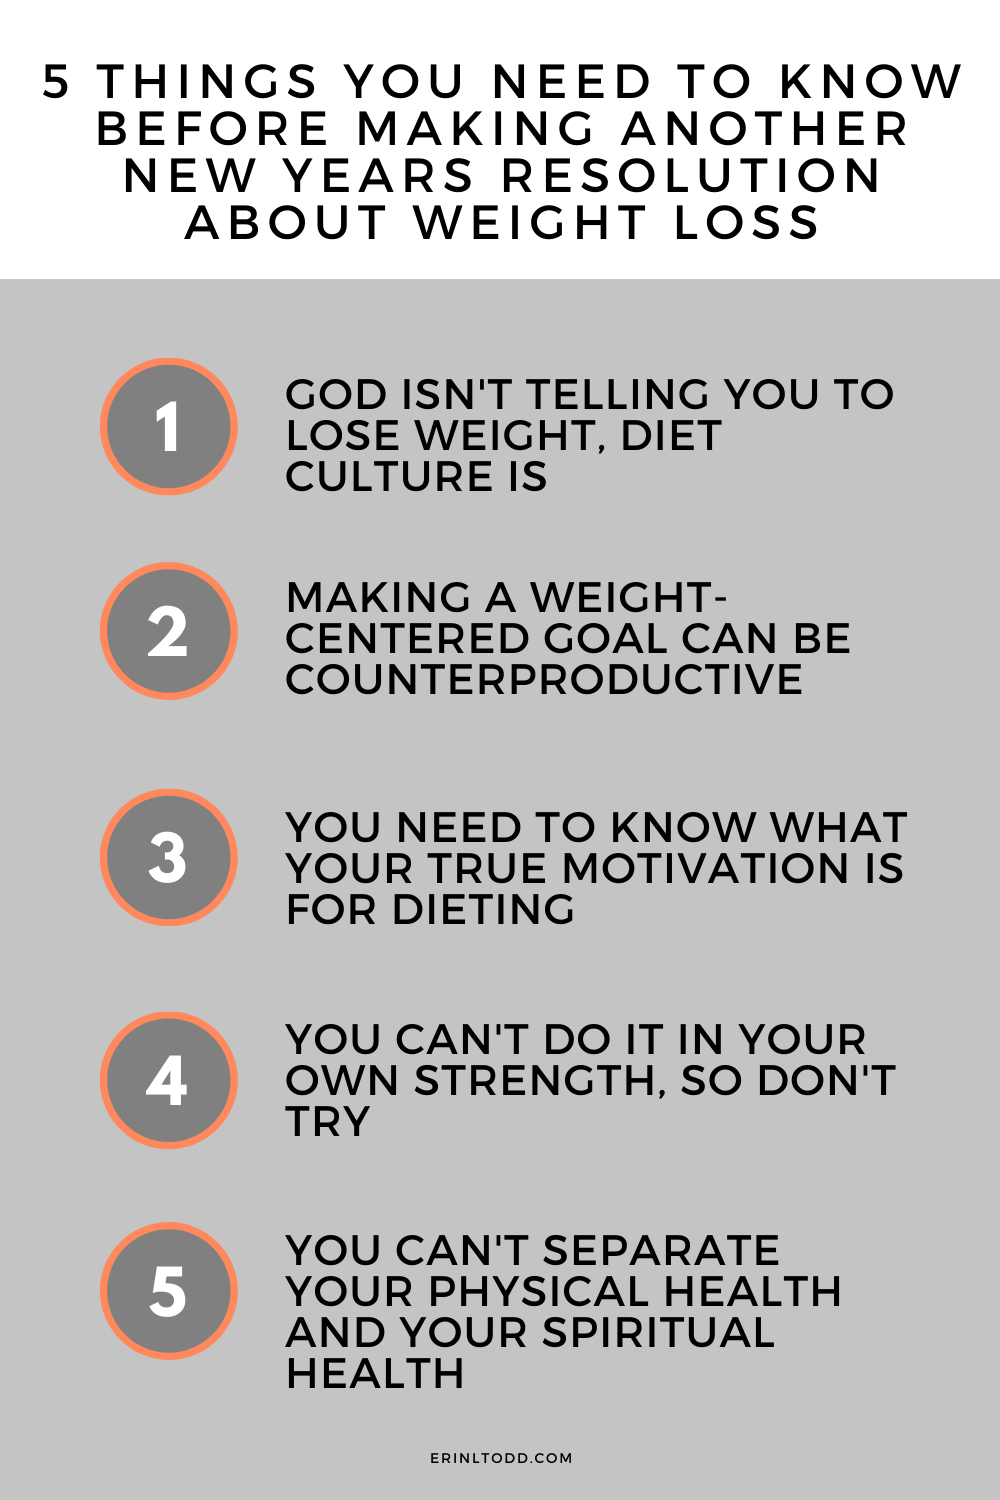 Here are 5 things you need to know before making another Christian weight loss resolution in the new year. 